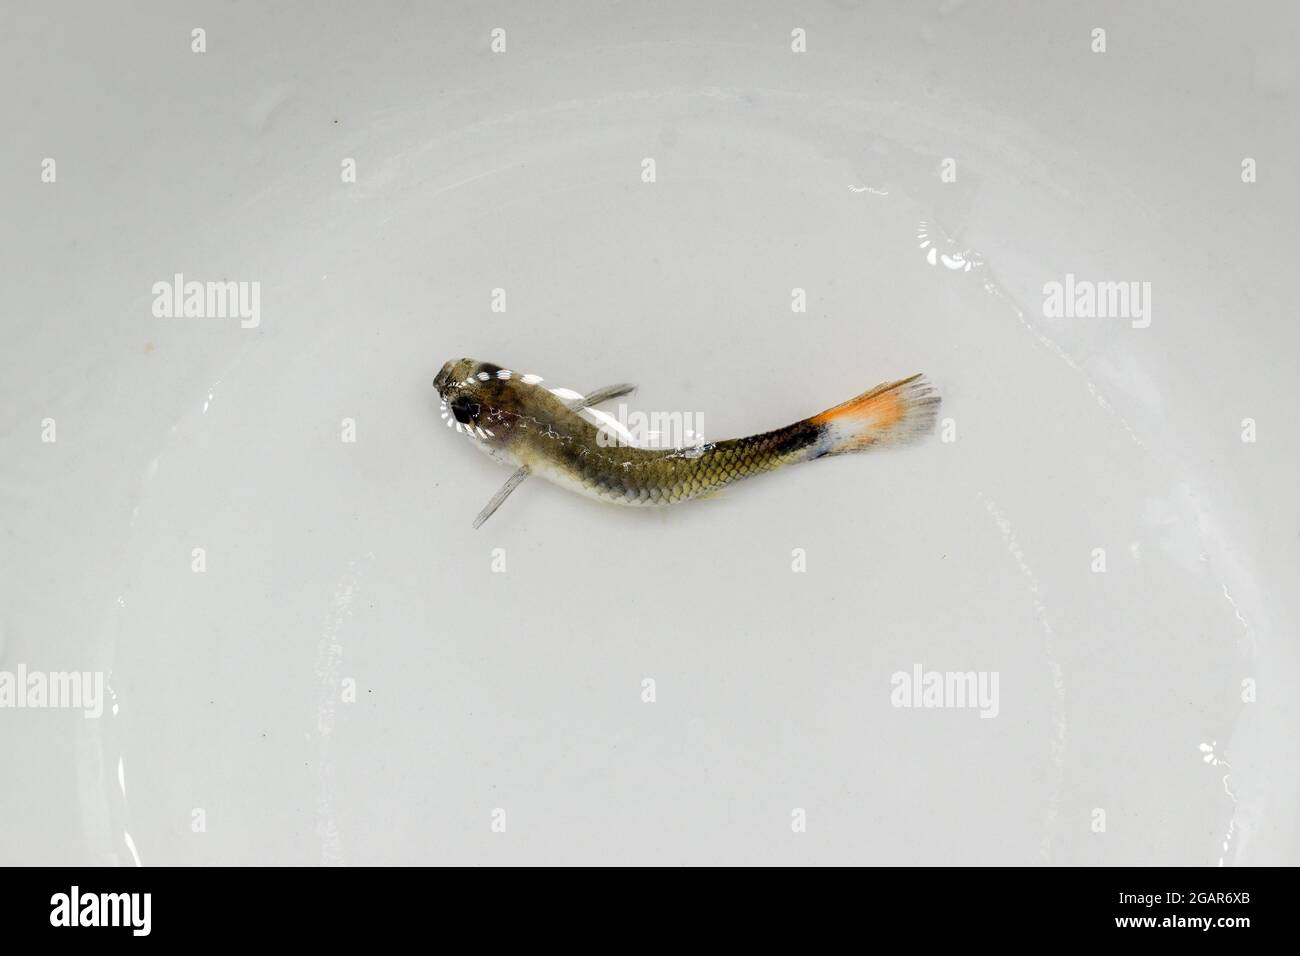 Guppy fish died due to bent spine disease. Dead Small fish on the surface of water. Stock Photo